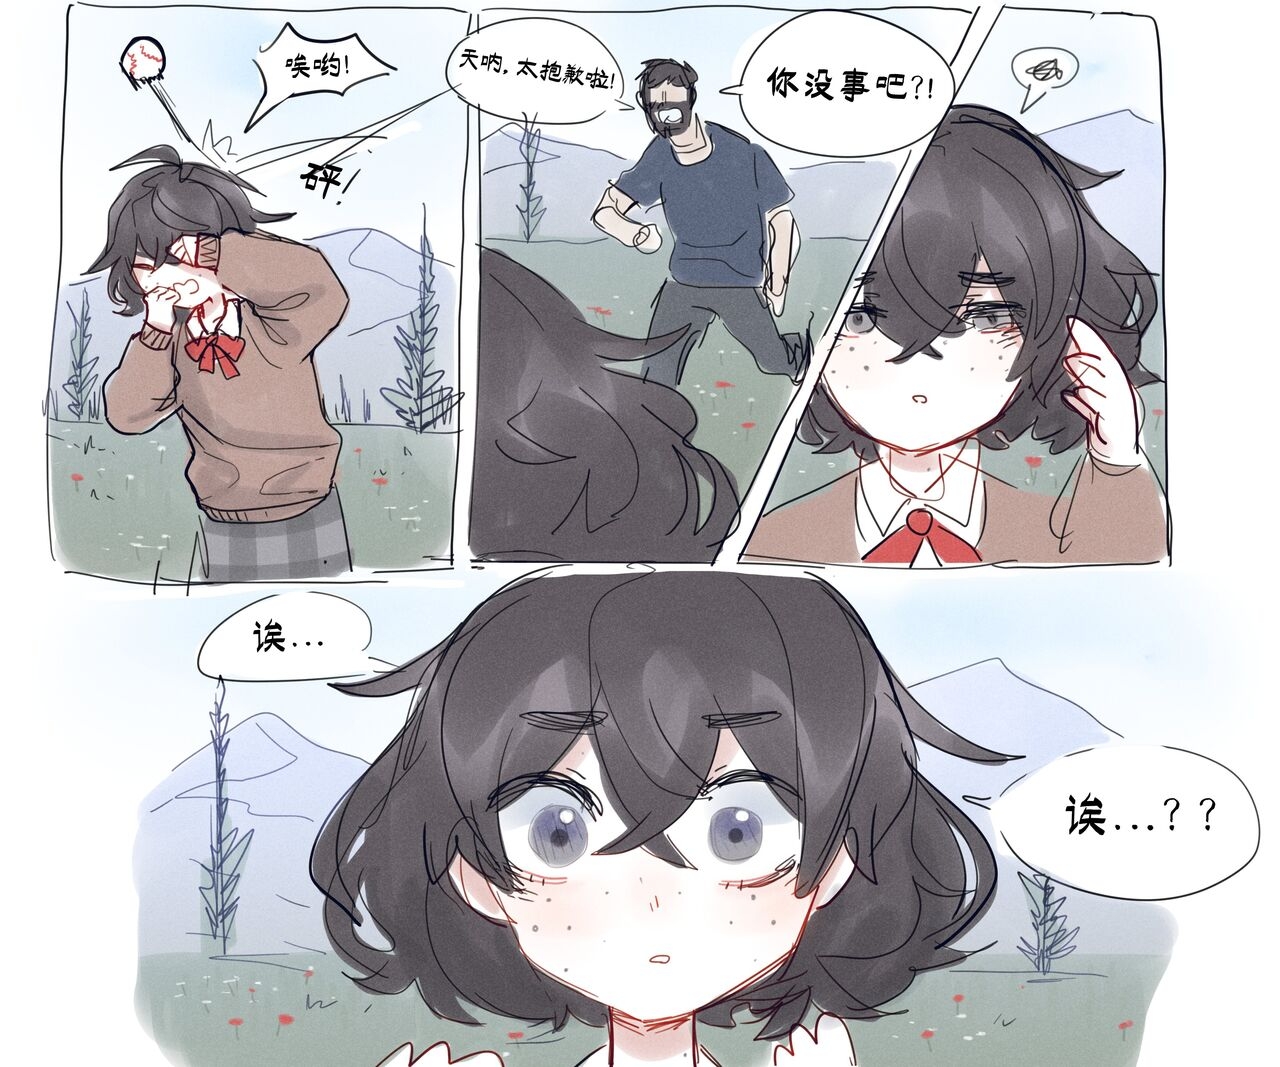 [popopoka] Blind Girl's accident [Chinese] [白杨汉化组] 1